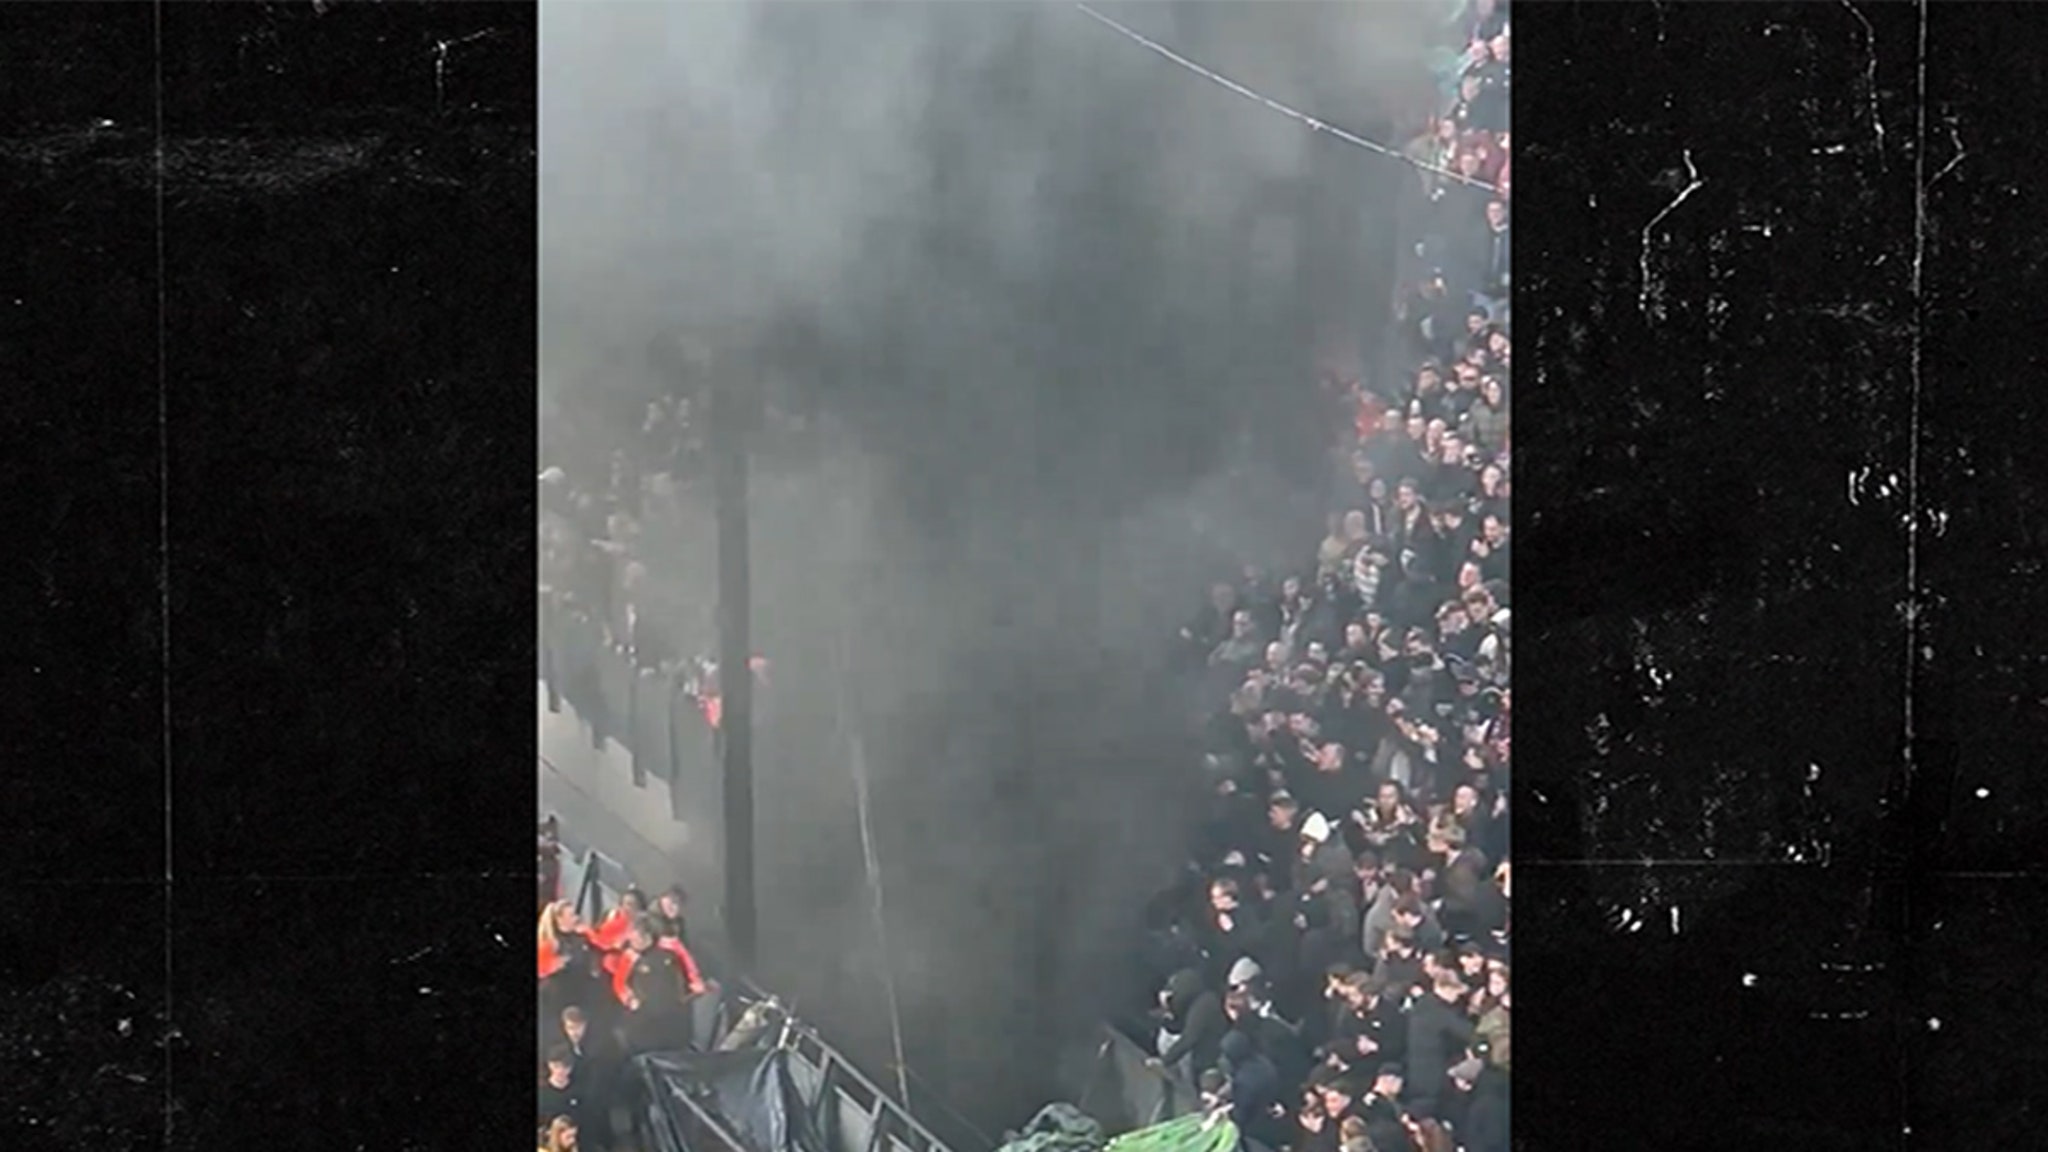 Fire Breaks Out Behind Goal During Dutch Final Soccer Game